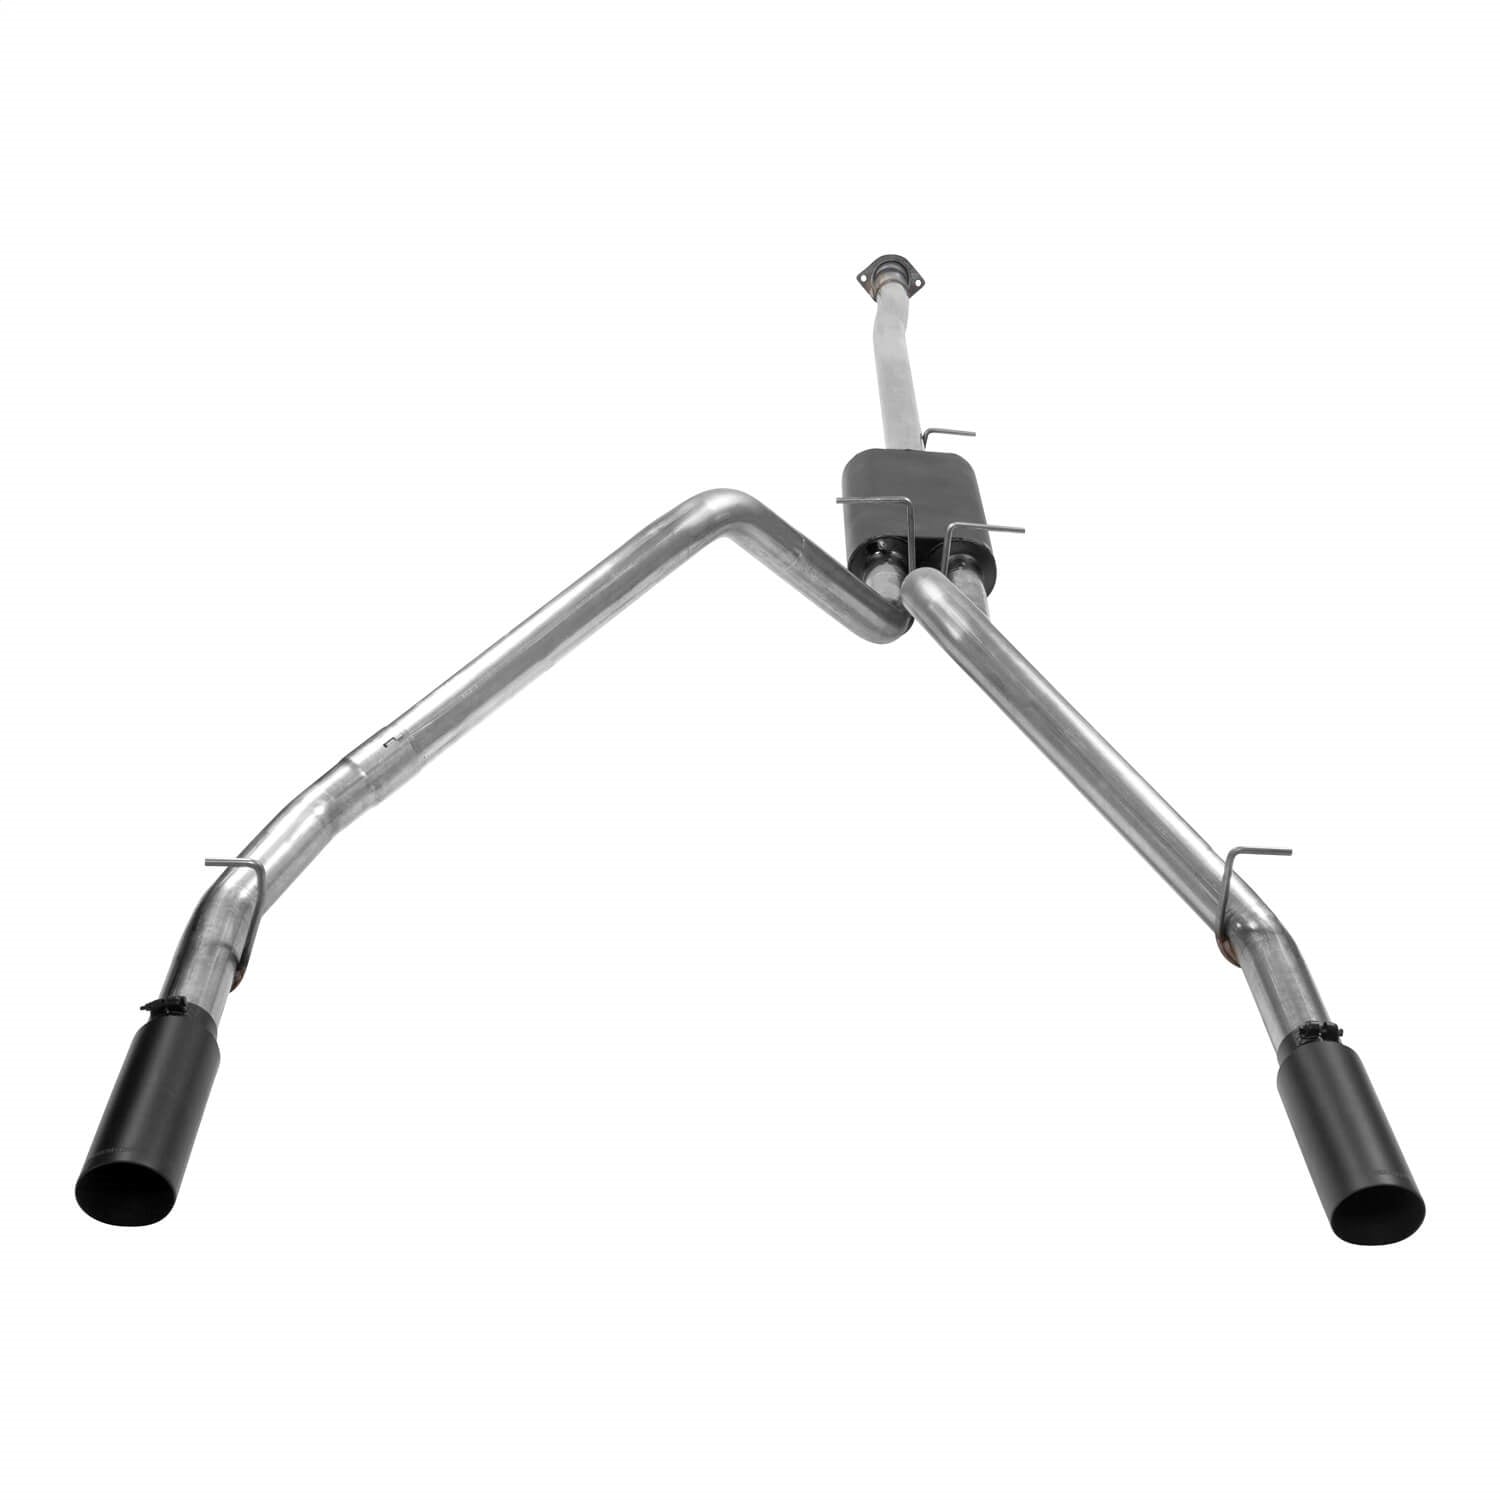 Flowmaster 817843 American Thunder Cat Back Exhaust System Fits 19-21 1500